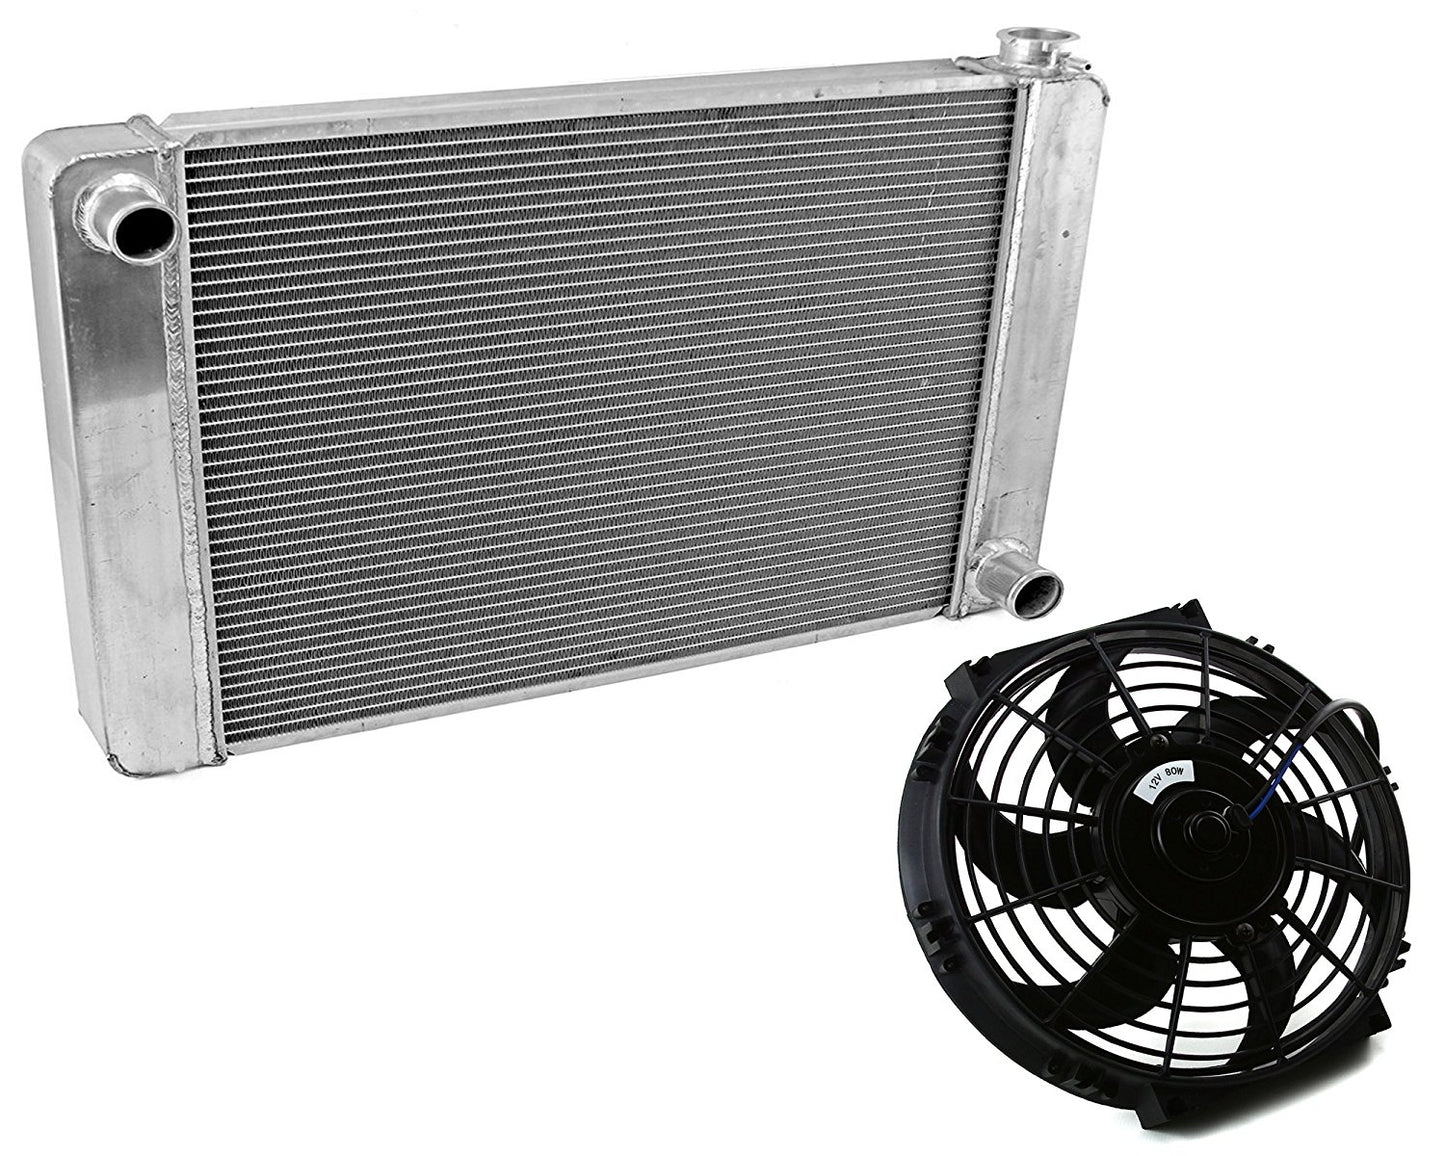 Fabricated Aluminum Radiator 24" x 19" x 3" Overall For SBC BBC Chevy GM &10" Electric Curved Blade Cooling Fan